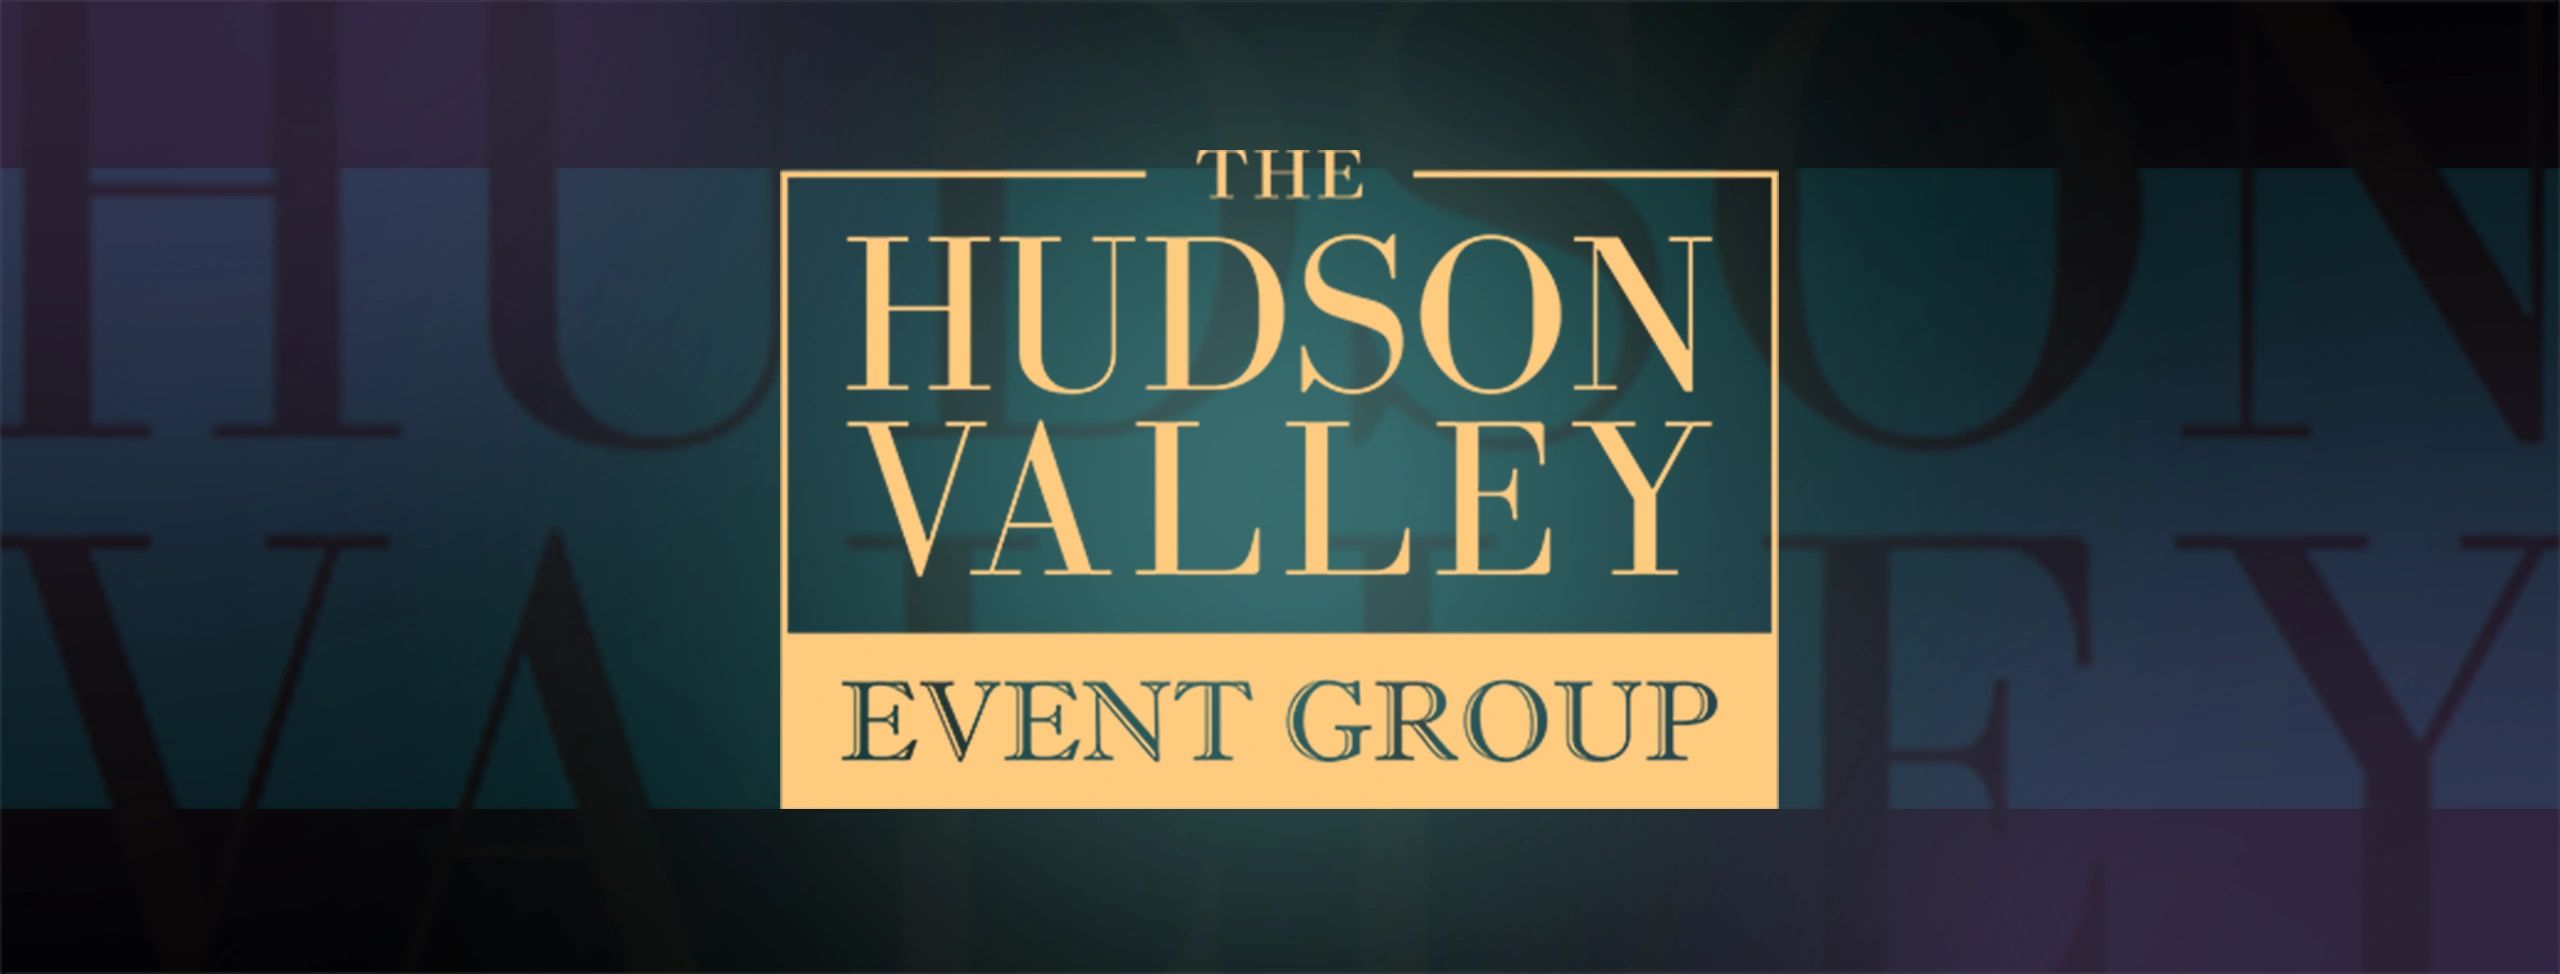 Hudson Valley Event Group